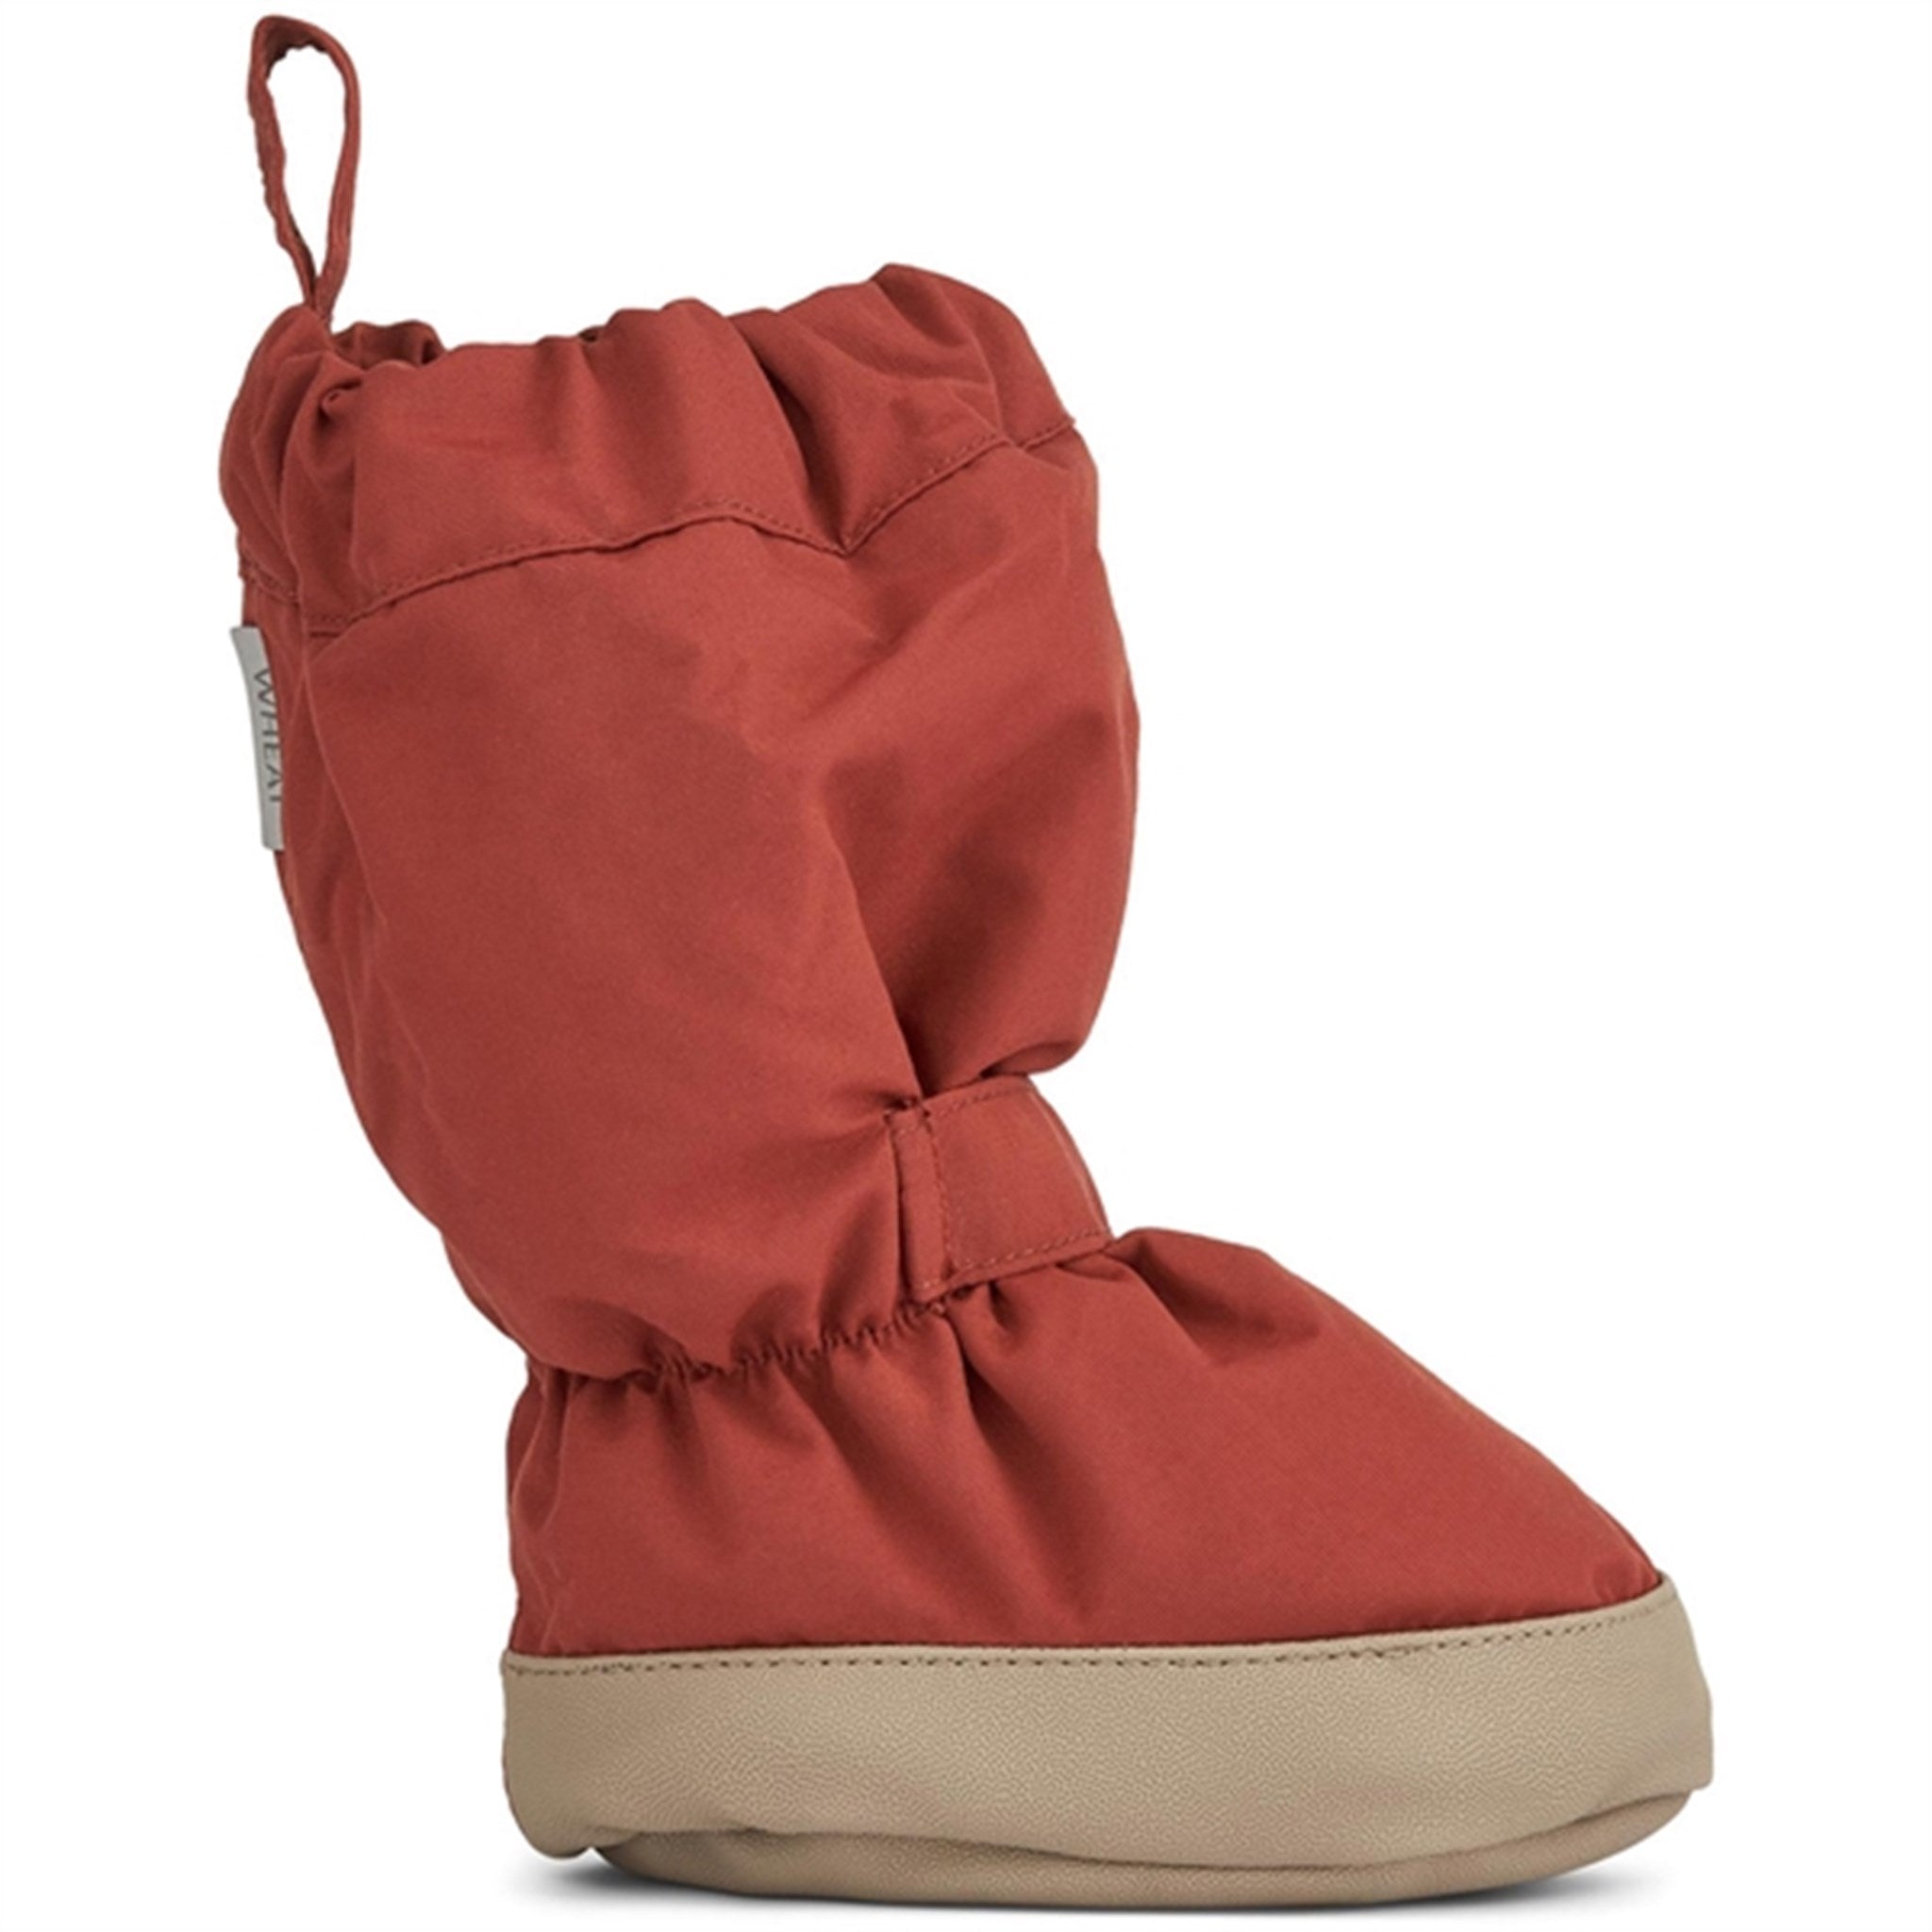 Wheat Outerwear Booties Tech Red 3